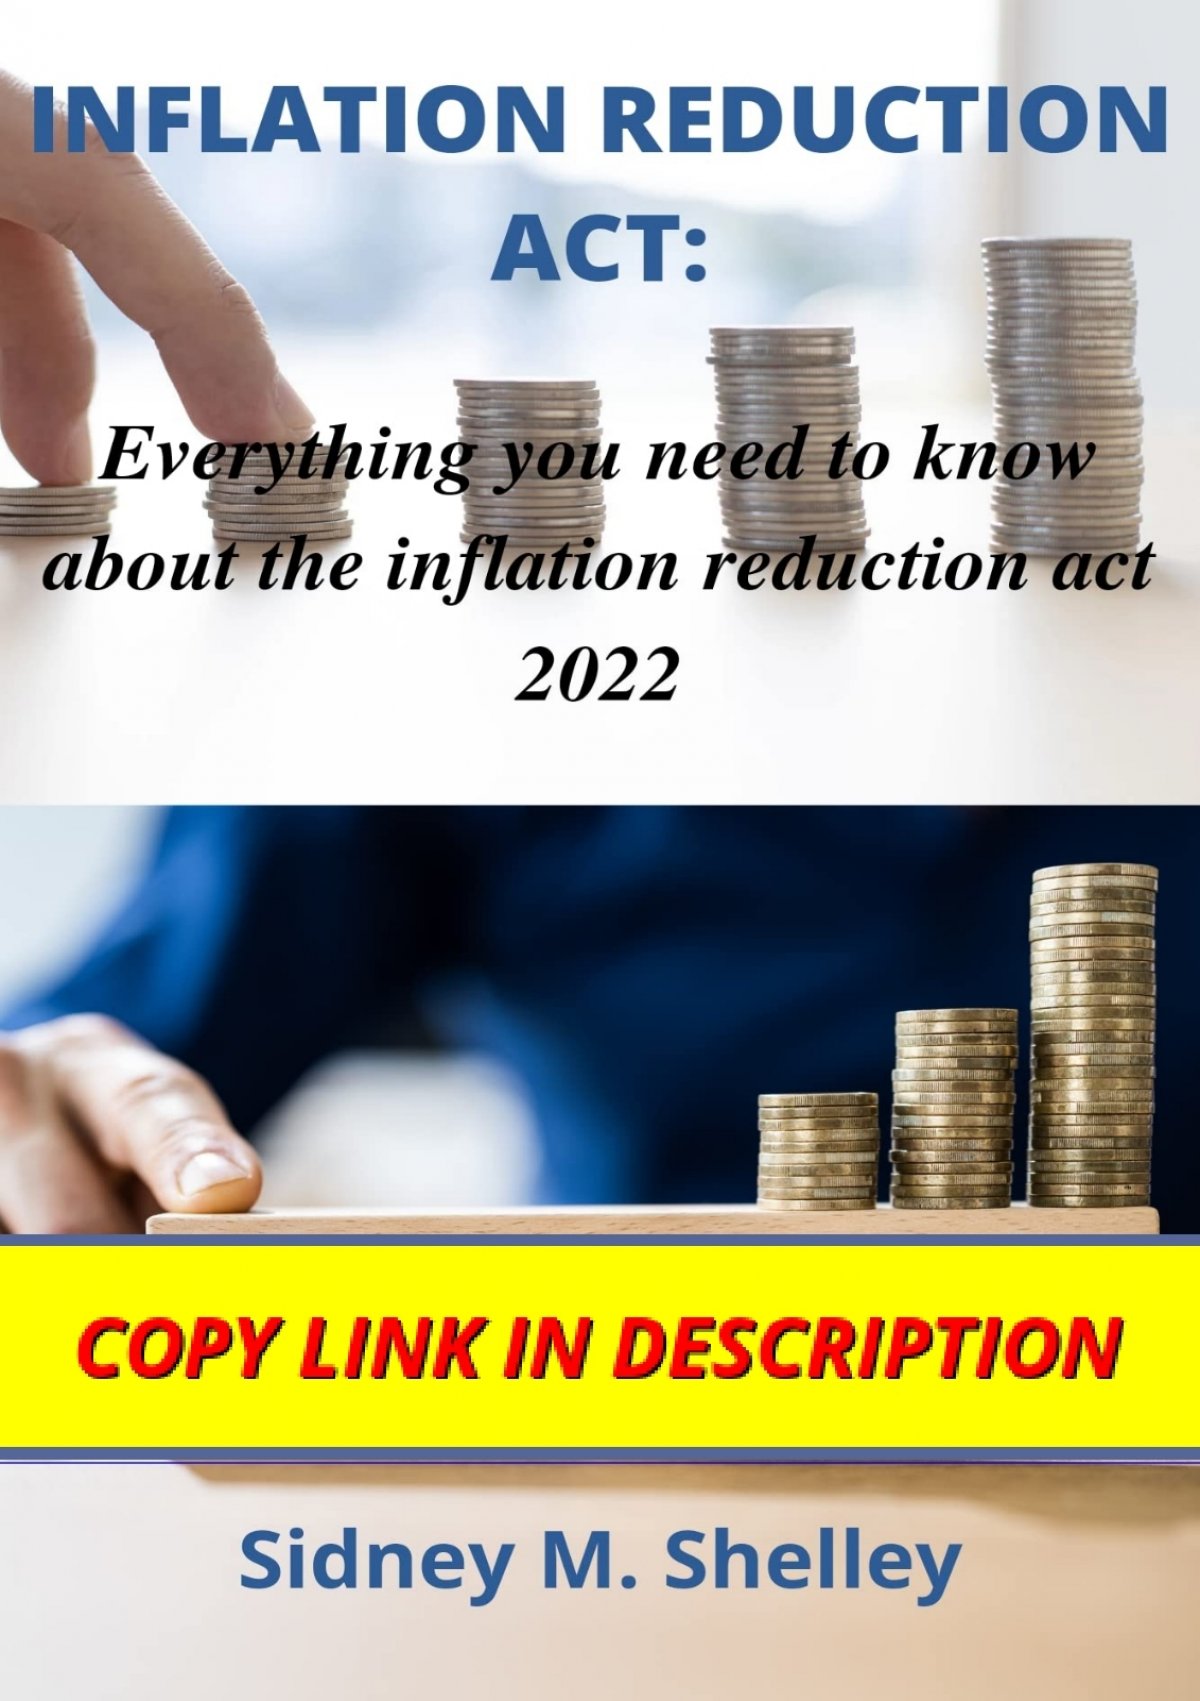 [EPUB] eBook INFLATION REDUCTION ACT Everything you need to know about